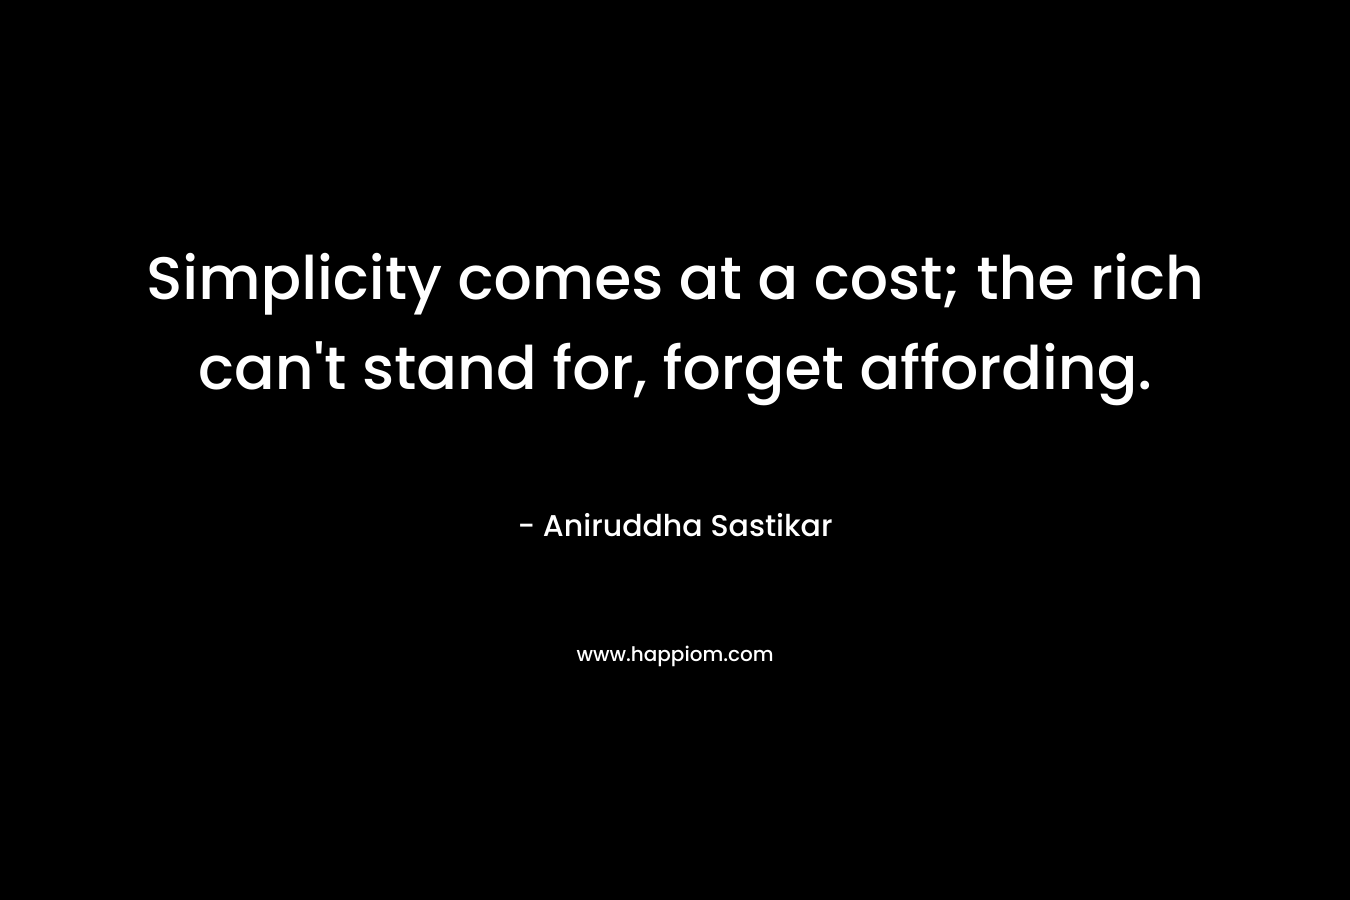 Simplicity comes at a cost; the rich can't stand for, forget affording.